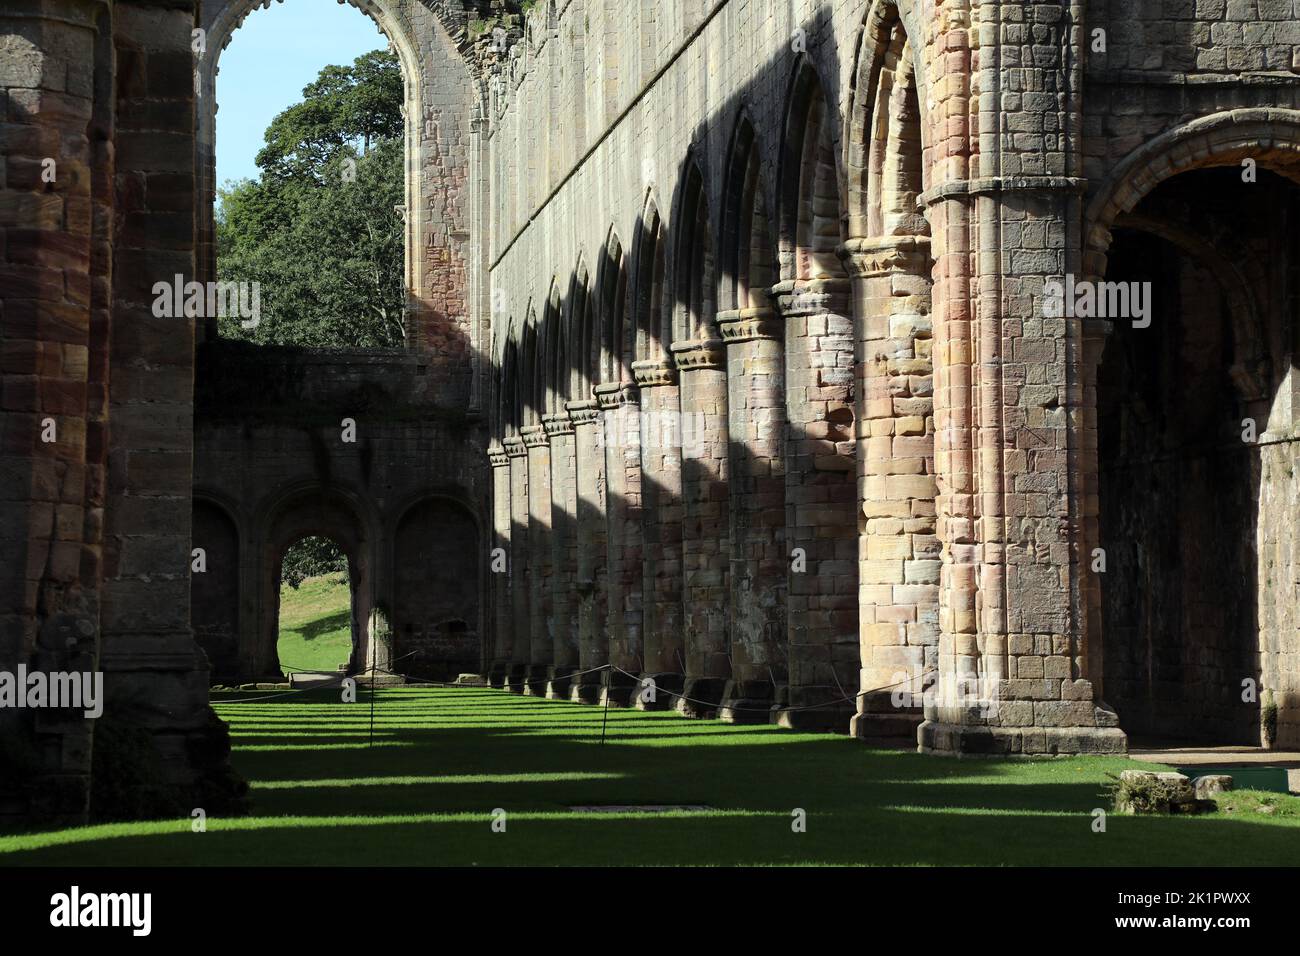 Interior of the ruined Fountains Abbey church looking down the nave, in North Yorkshire, England, UK. Stock Photo